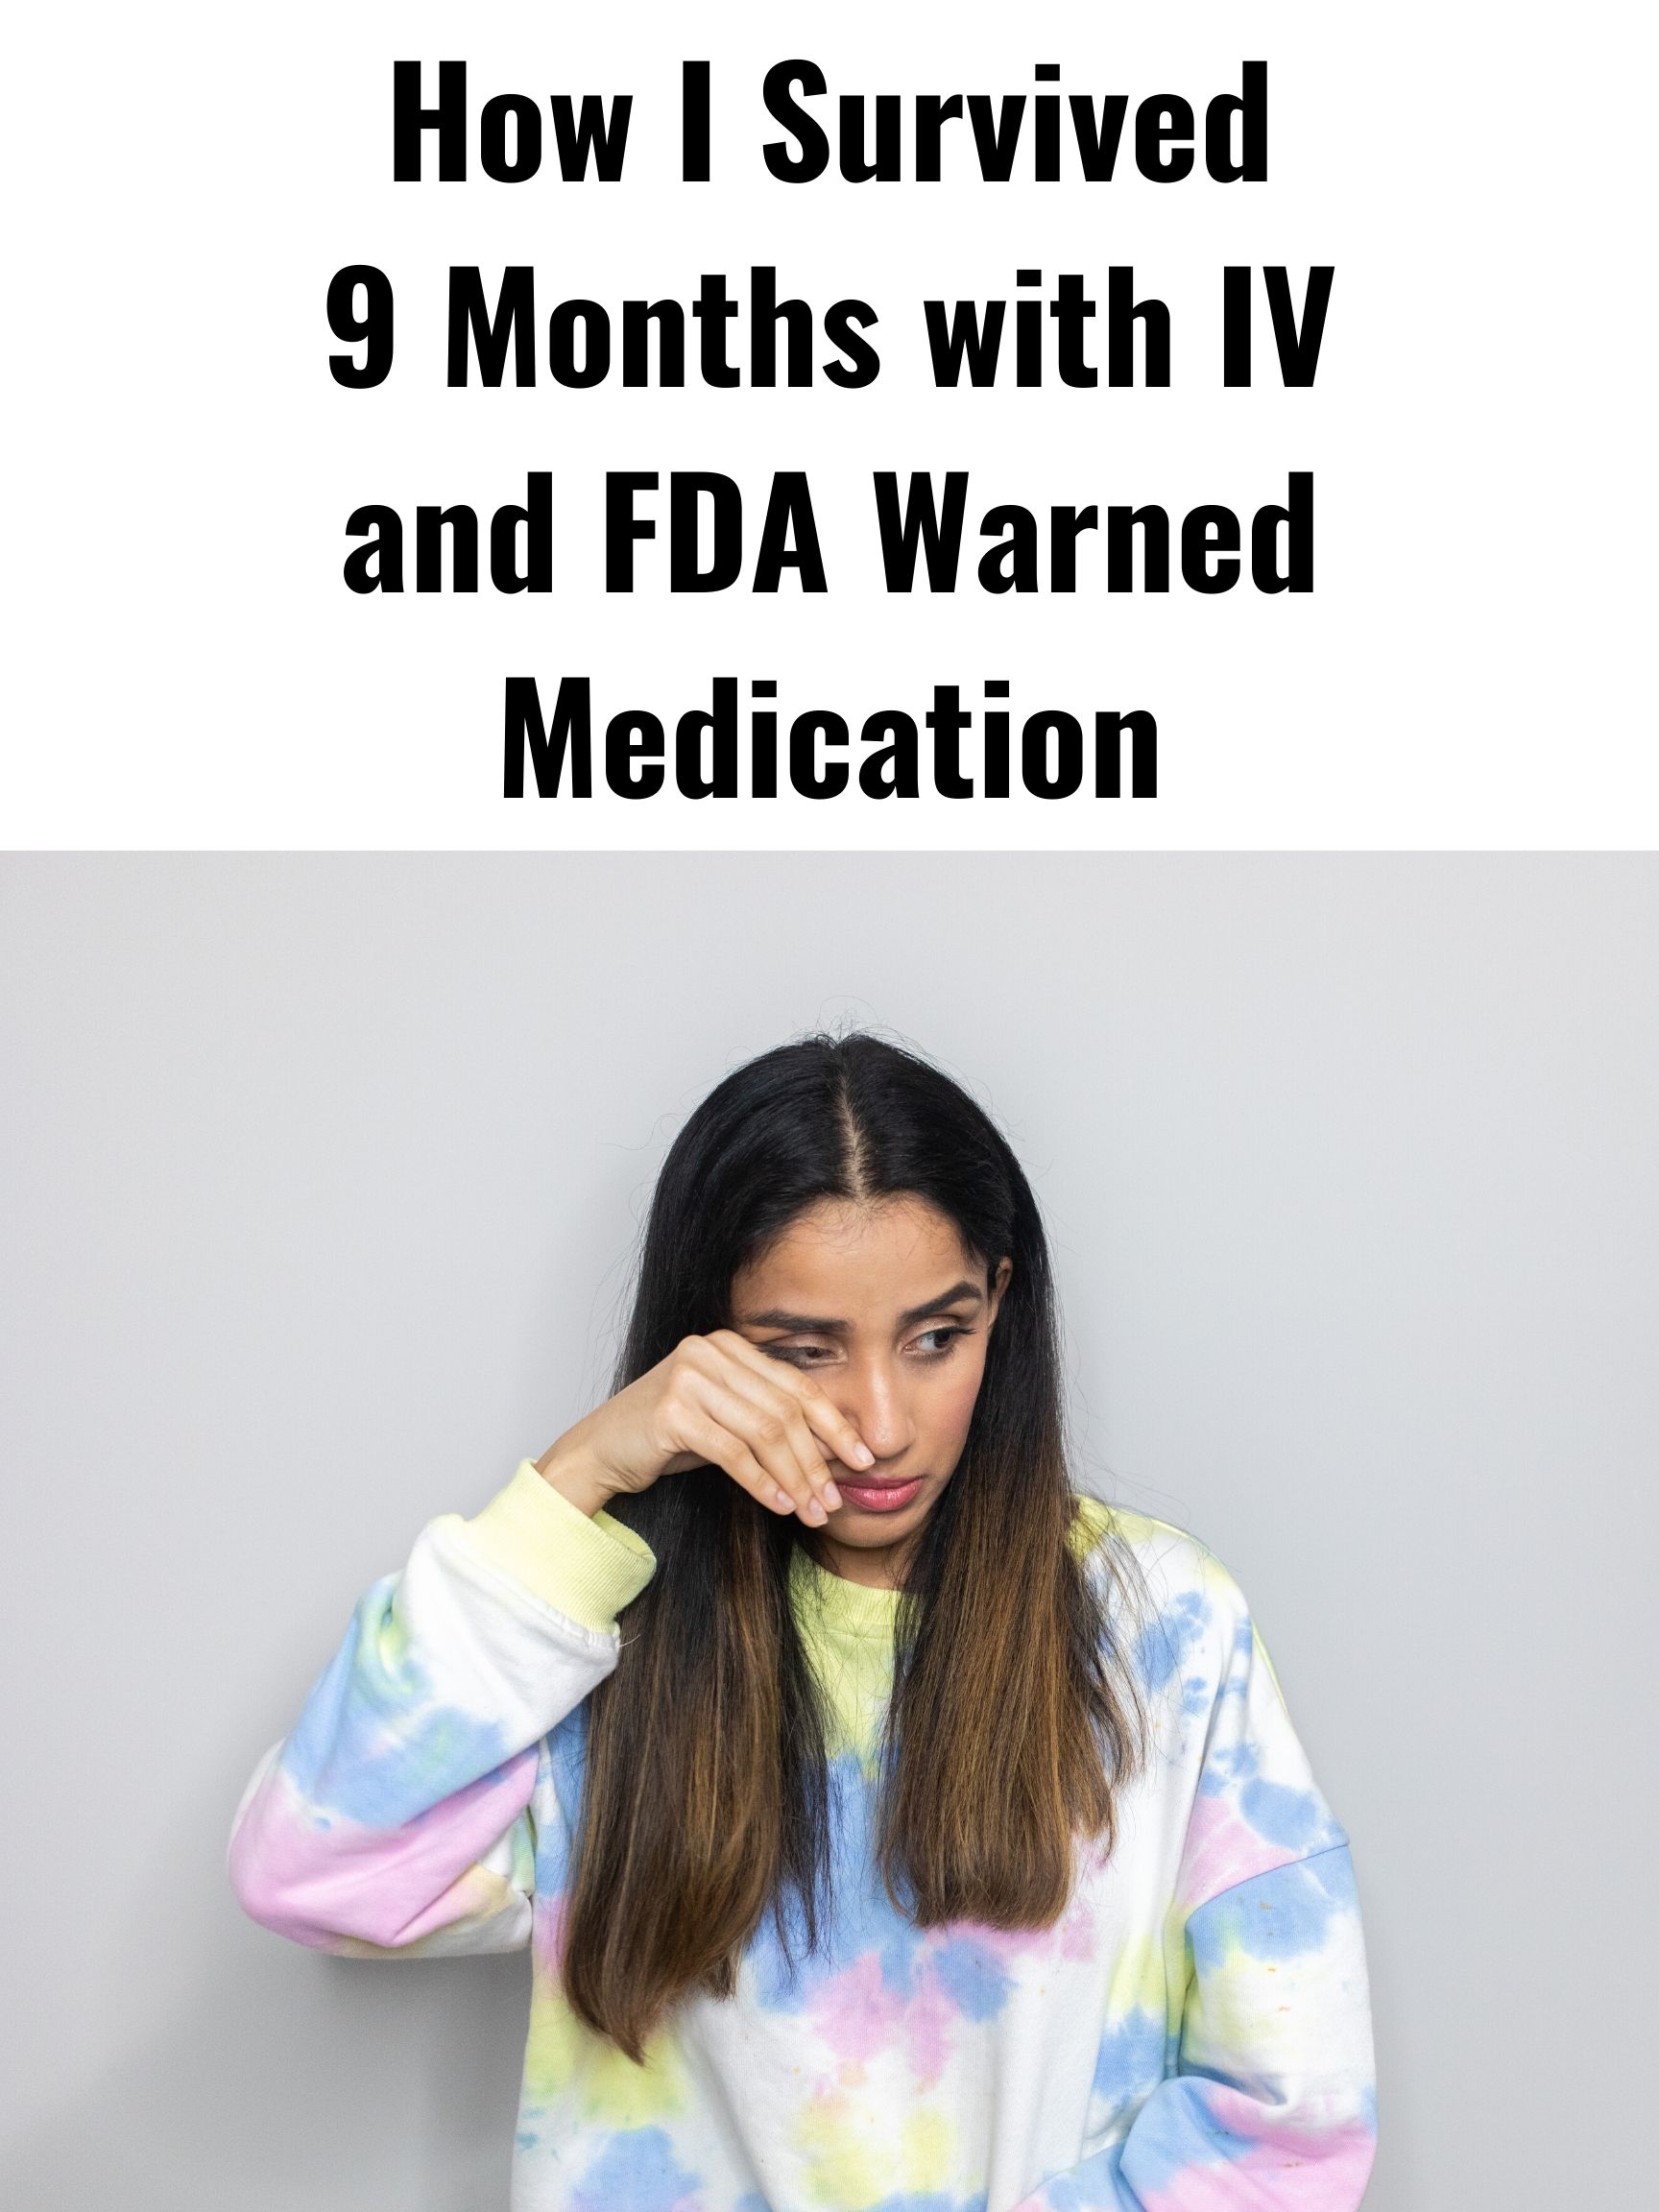 I was on IV and FDA Warned Medication through out my 9 months of pregnancy 1